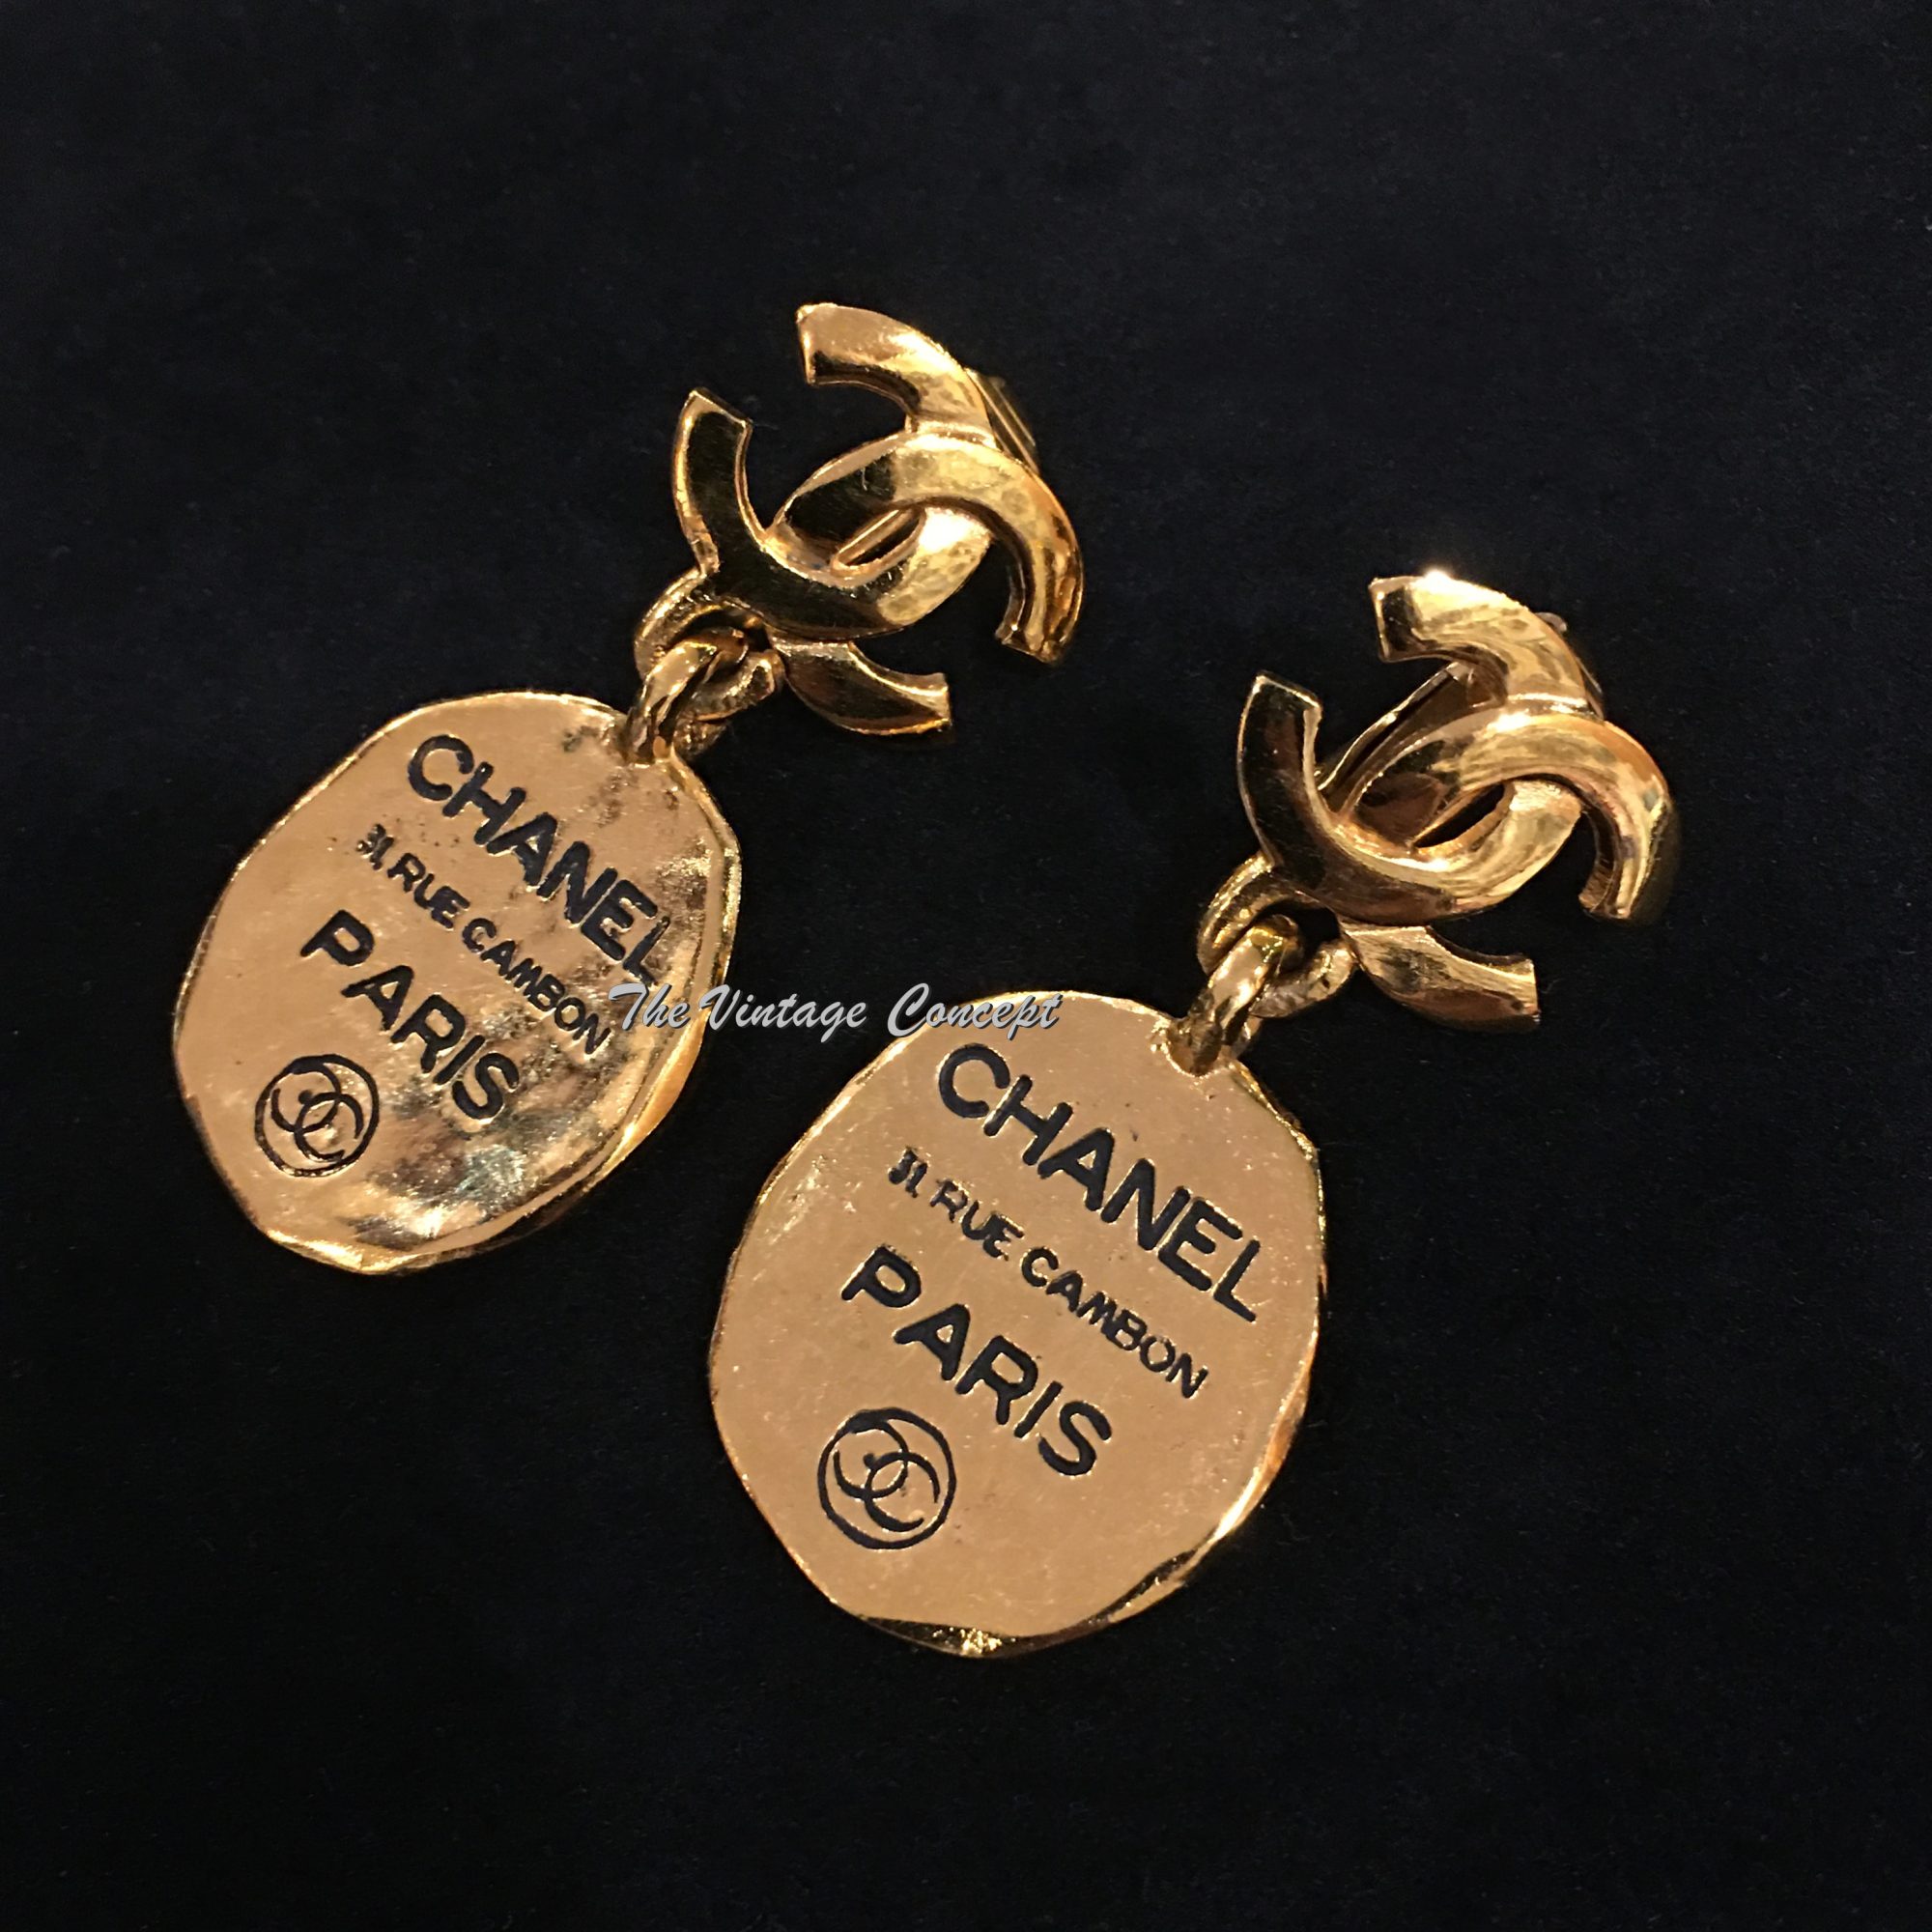 Chanel Gold Tone Dangle Round 31 Rue Cambon Paris Clip Earrings from 80's (SOLD) - The Vintage Concept